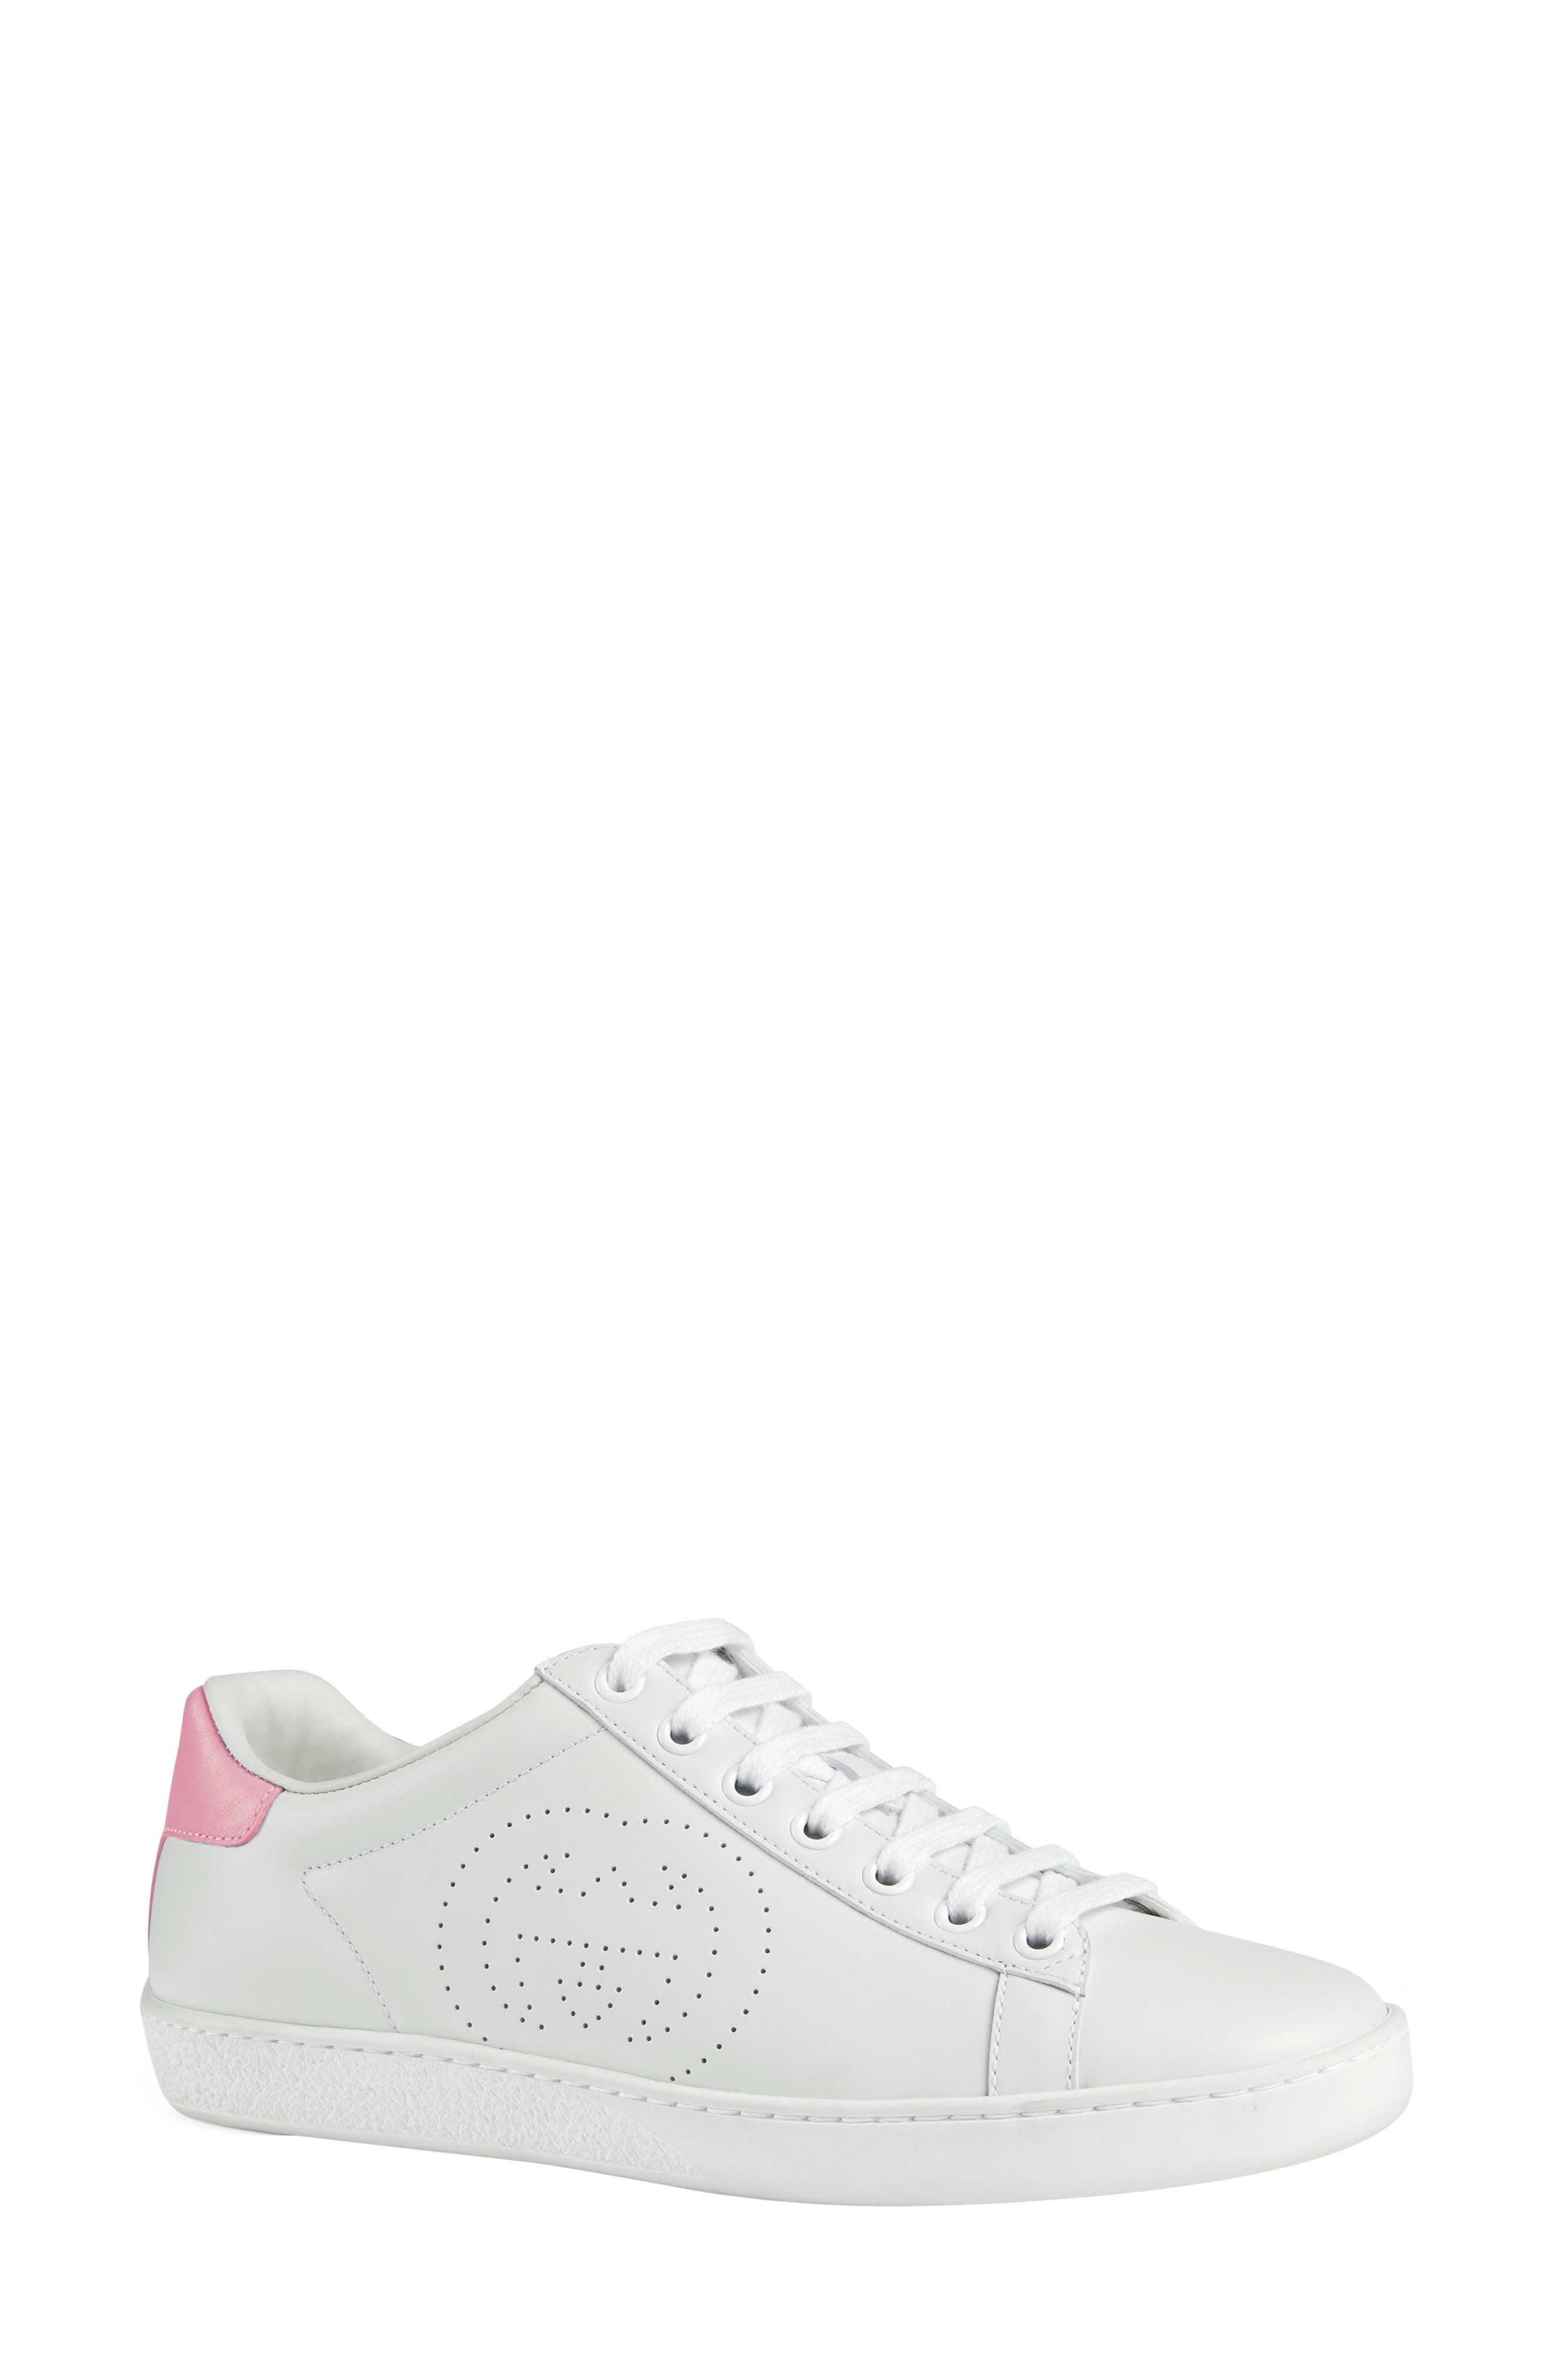 Women's Gucci Sneakers \u0026 Athletic Shoes 